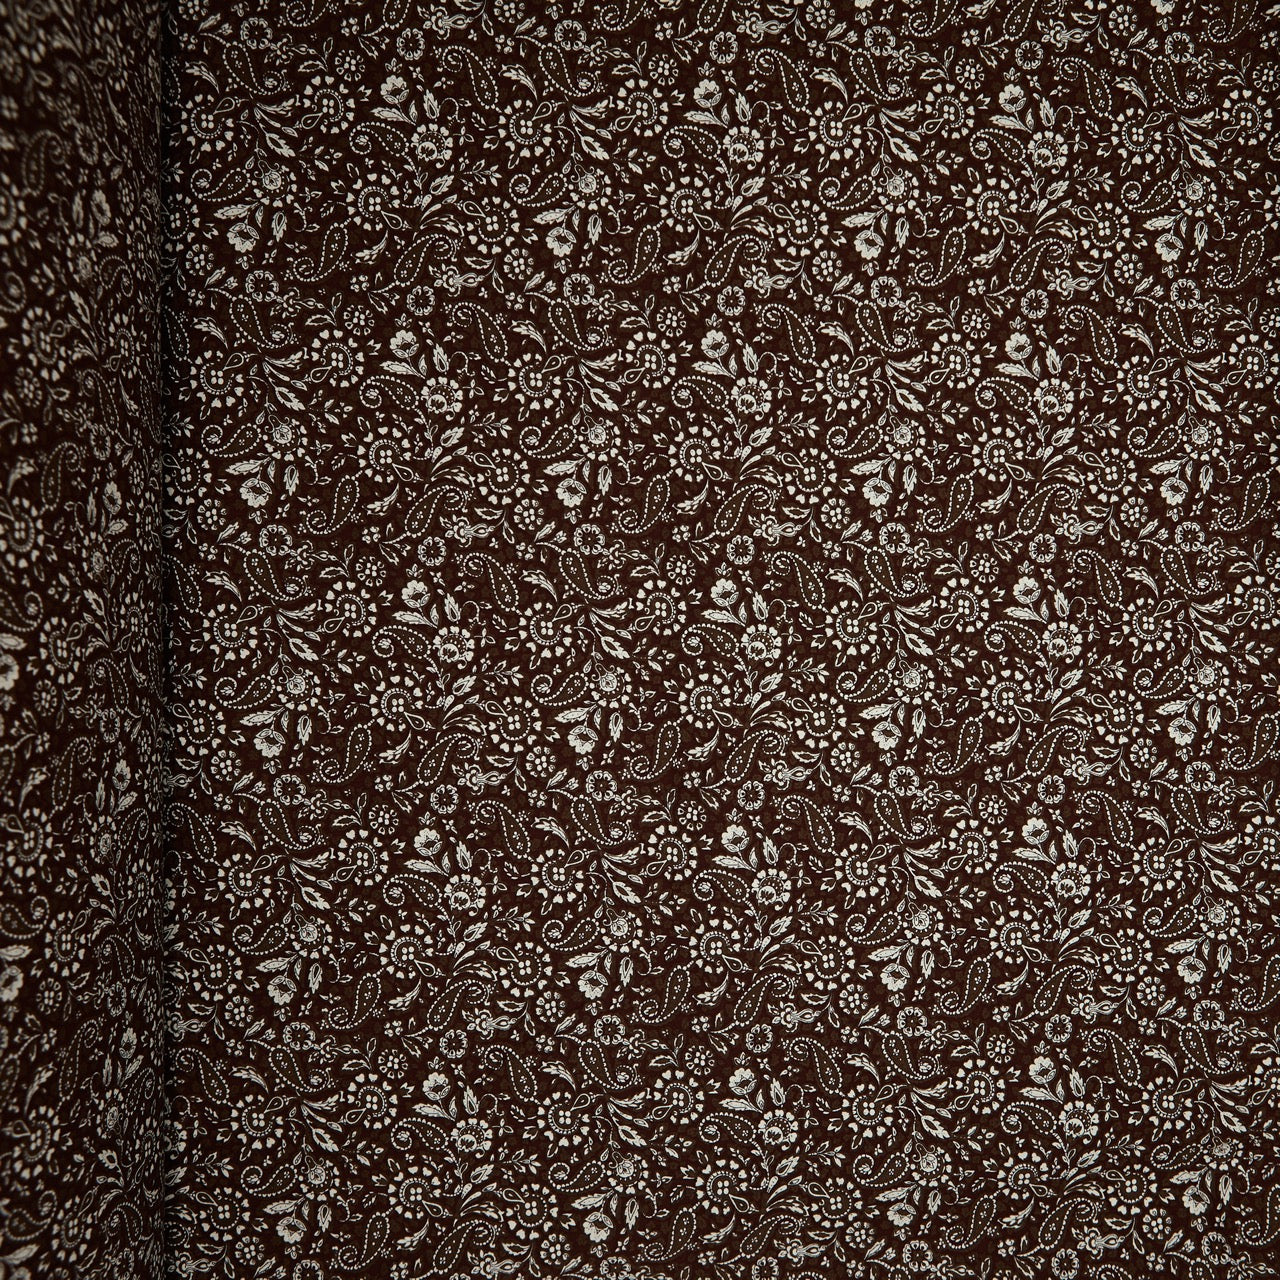 Cotton Floral - Paisley # 2 - Brown (full)